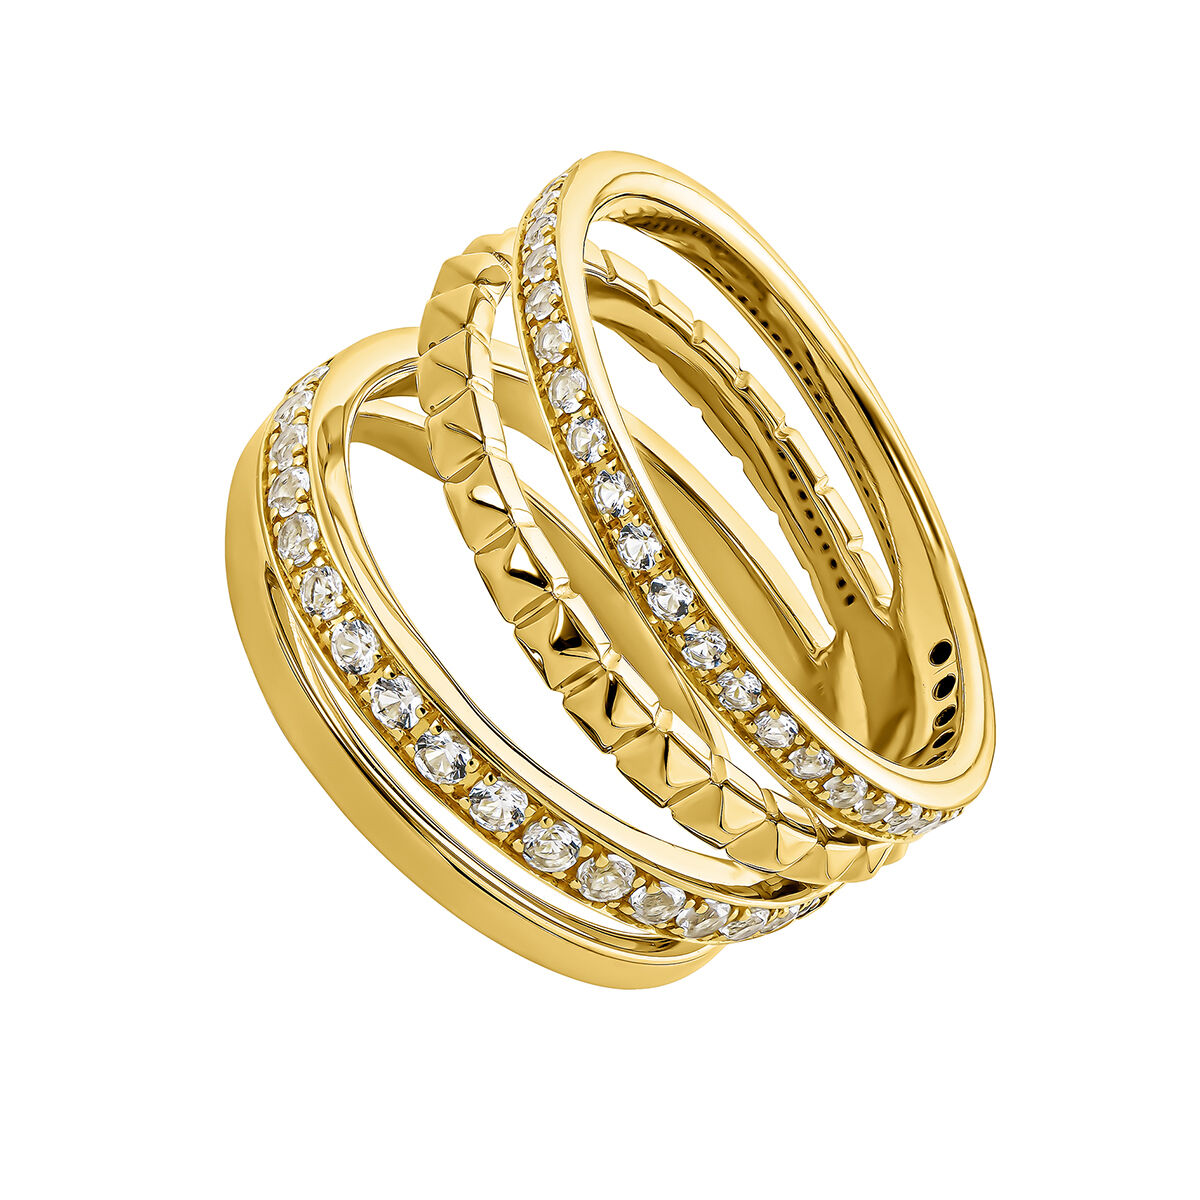 Multi-band ring in 18k yellow gold-plated silver with raised detail and white topazes , J04906-02-WT, hi-res